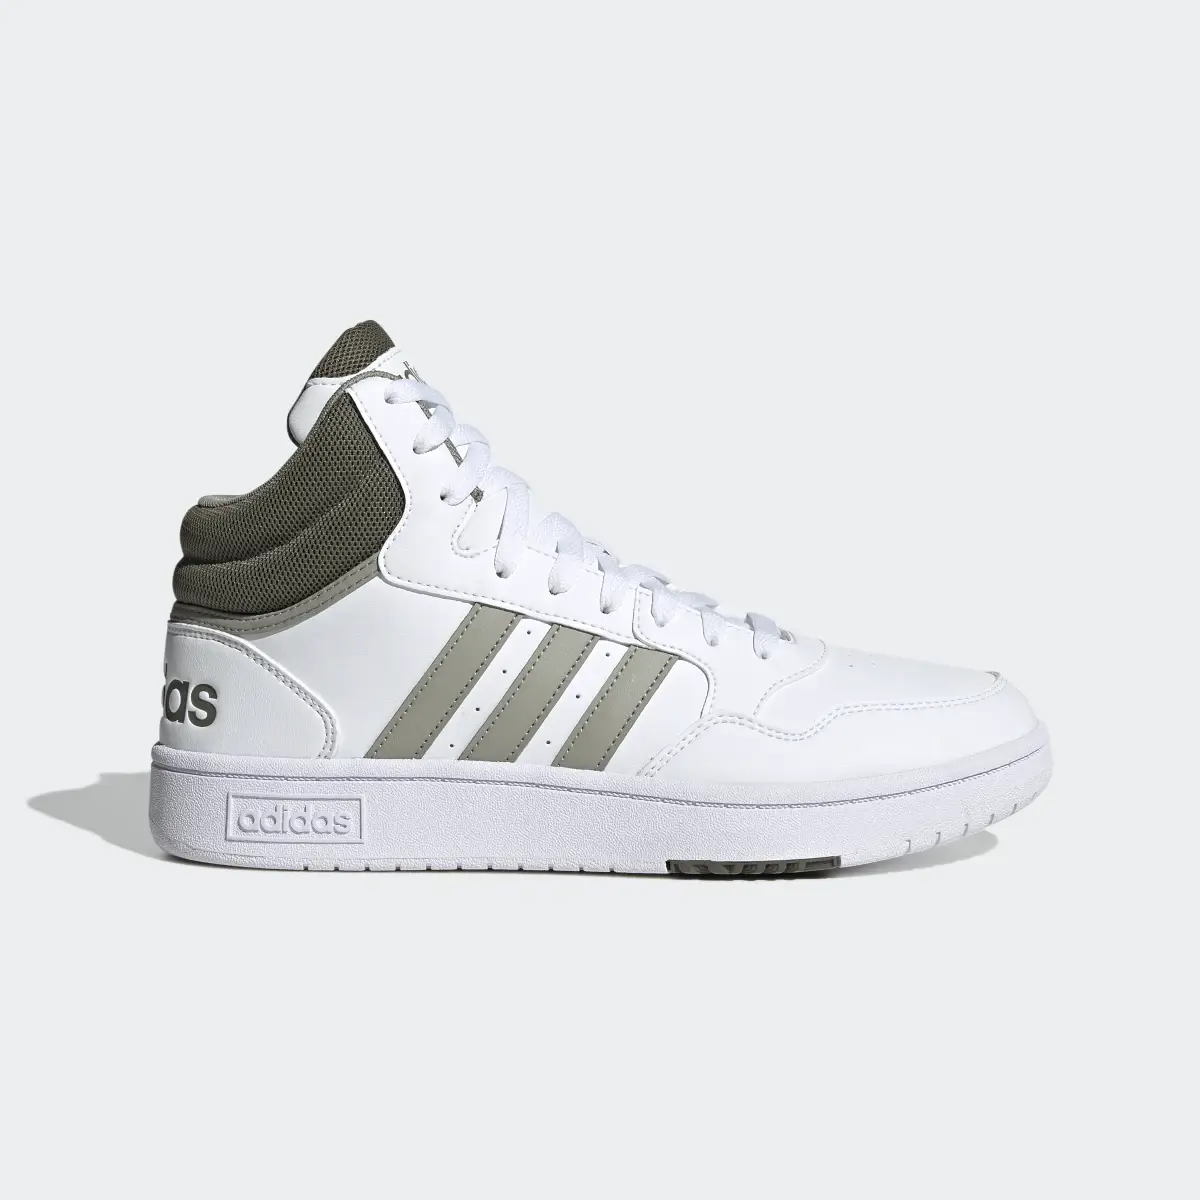 Adidas Hoops 3.0 Mid Classic Vintage Shoes. 2